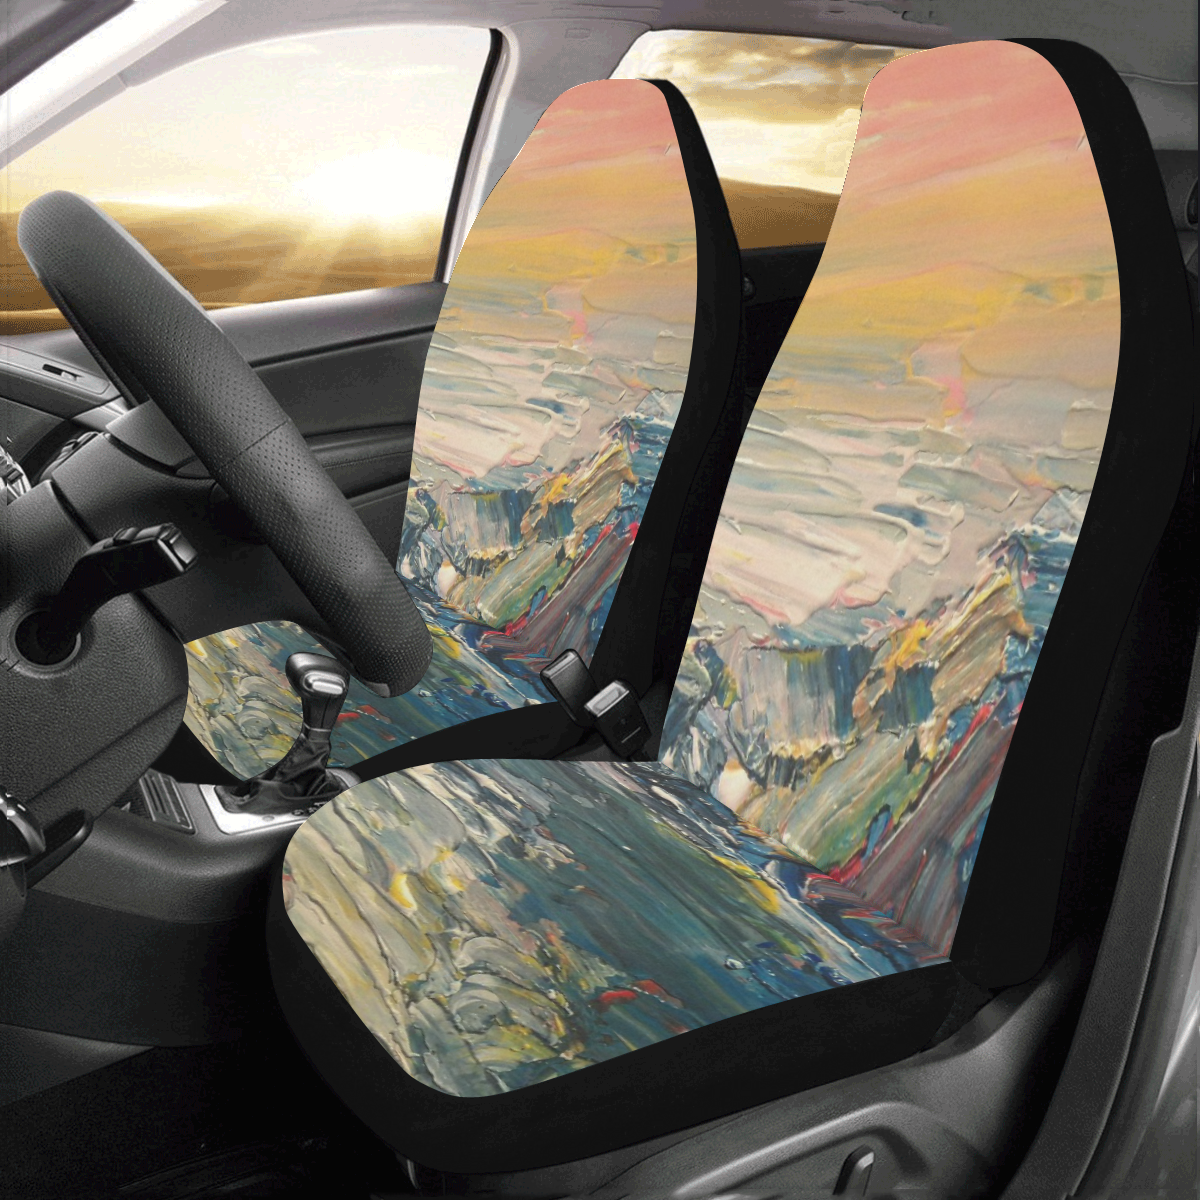 Mountains painting Car Seat Covers (Set of 2)